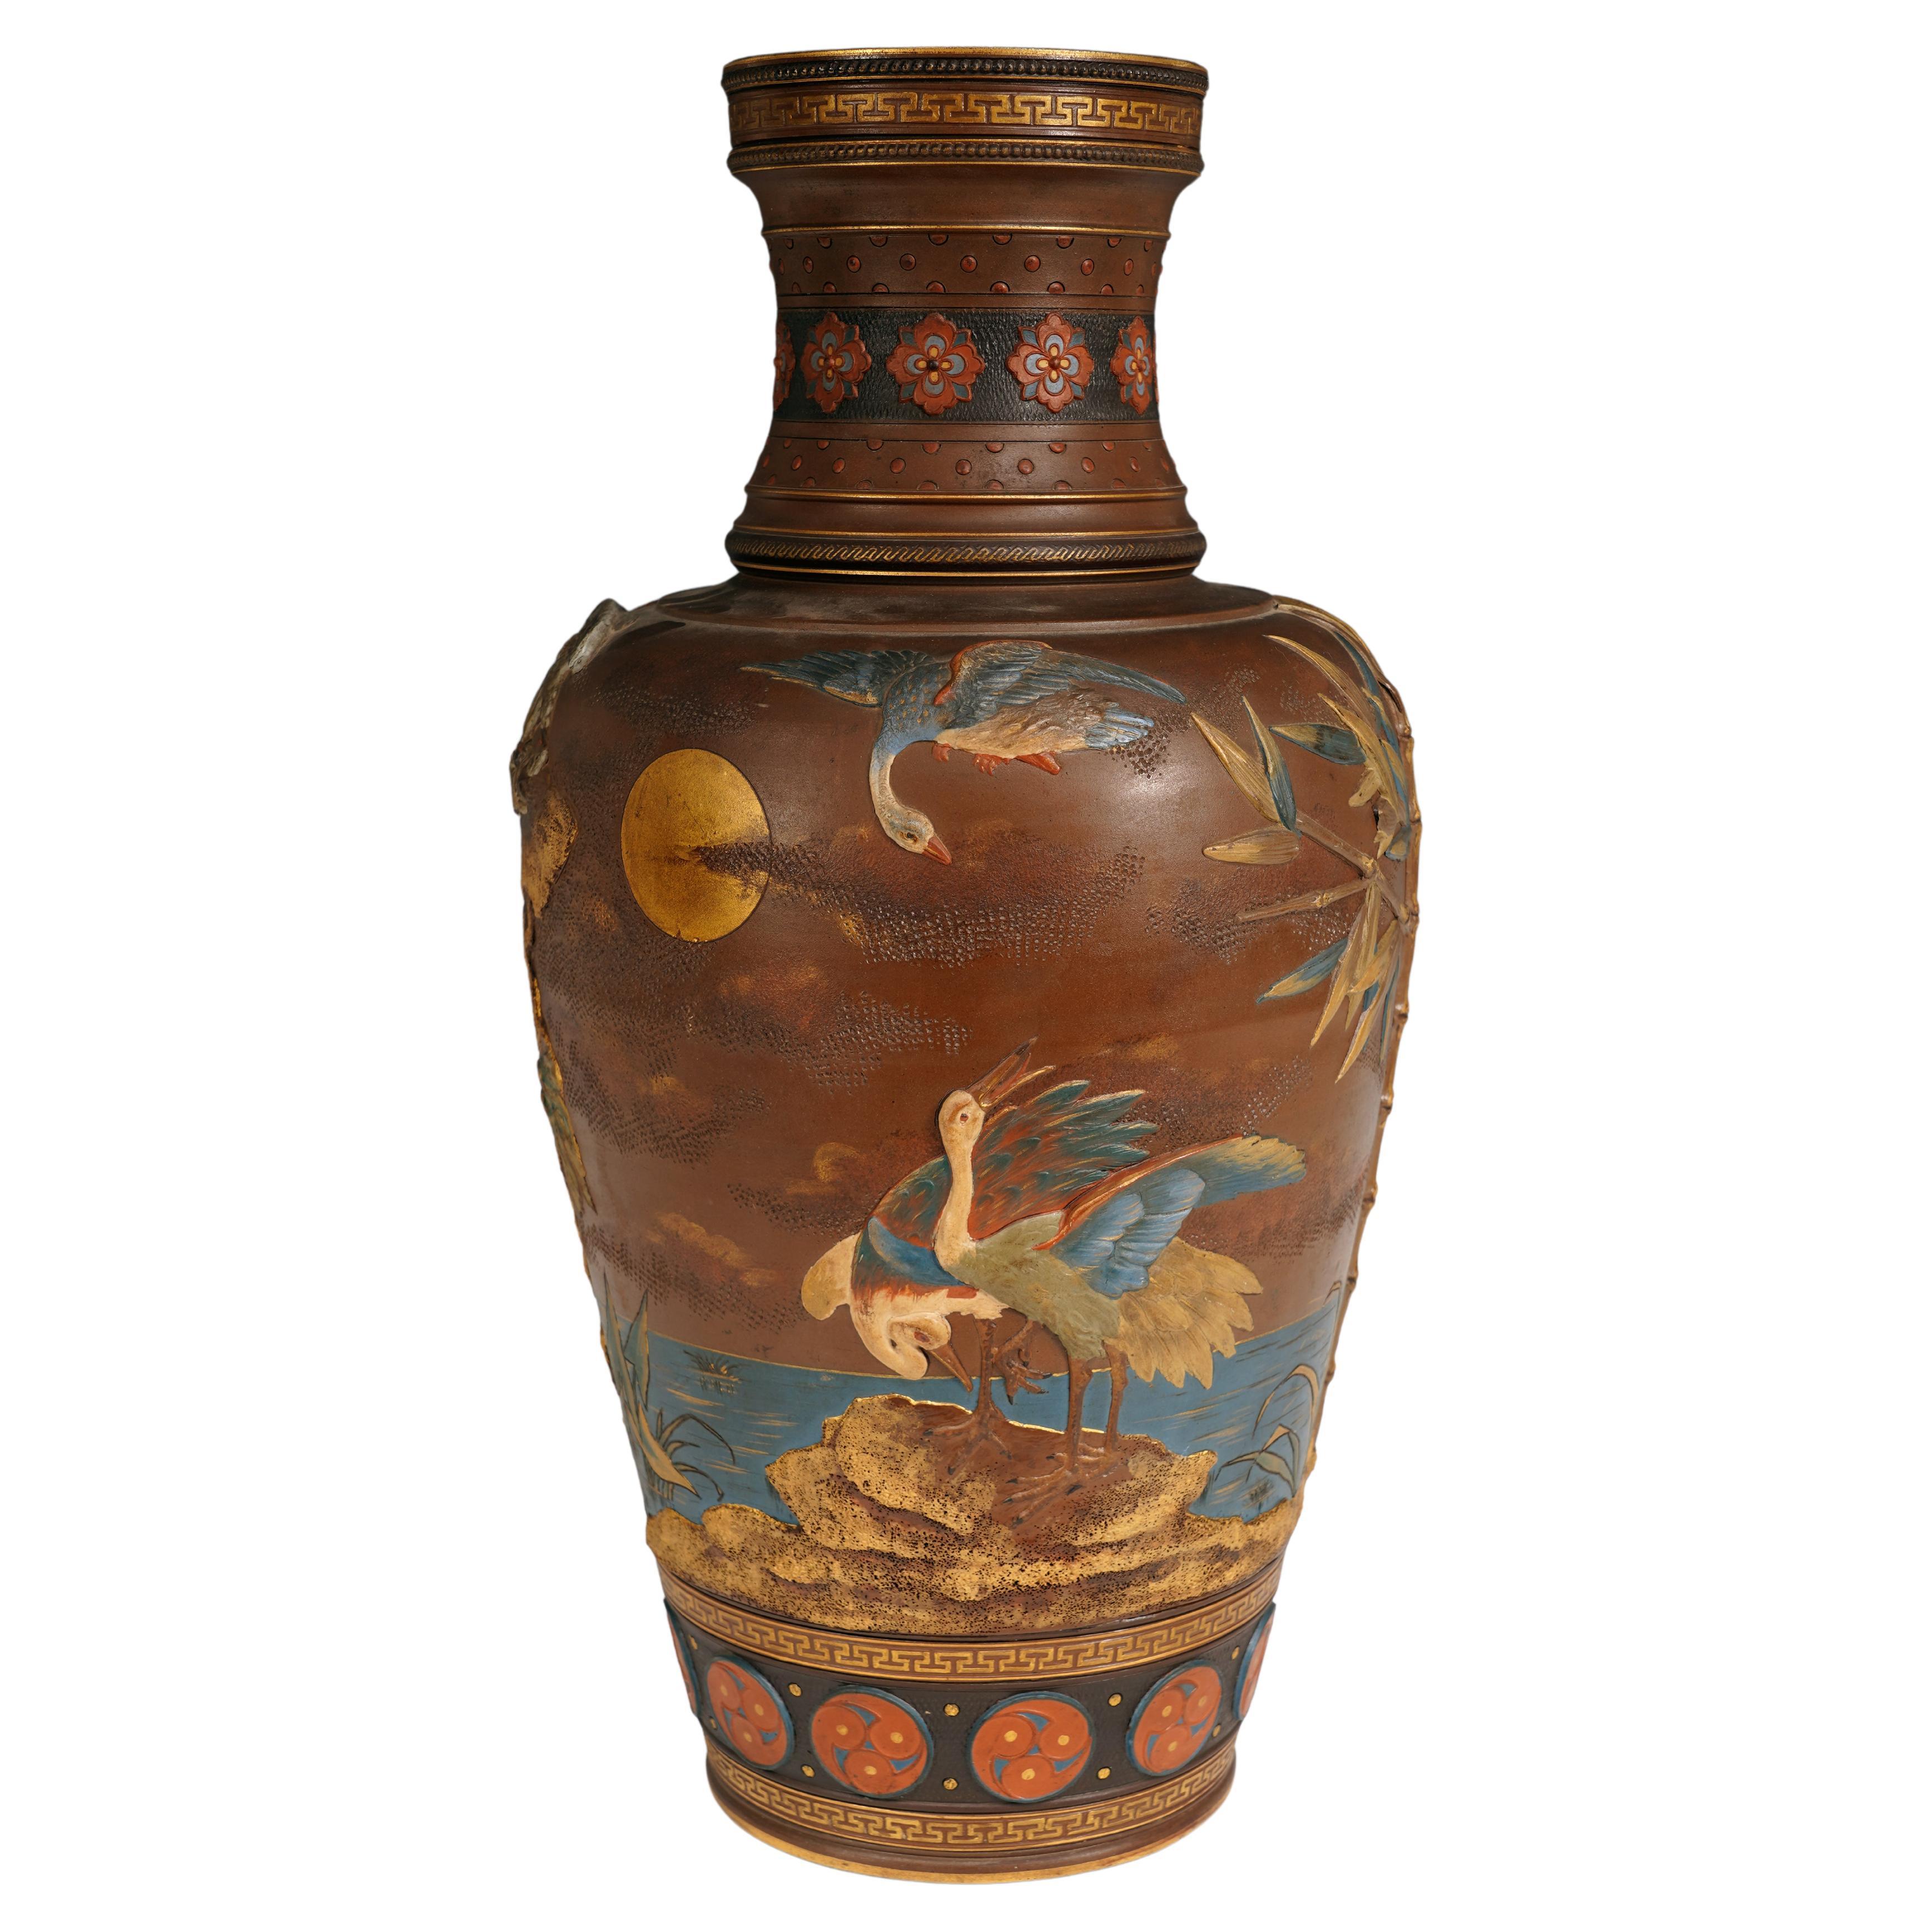 Vase with Cranes by the Villeroy&Boch Manufacture, Mettlach Germany, Circa 1900 For Sale